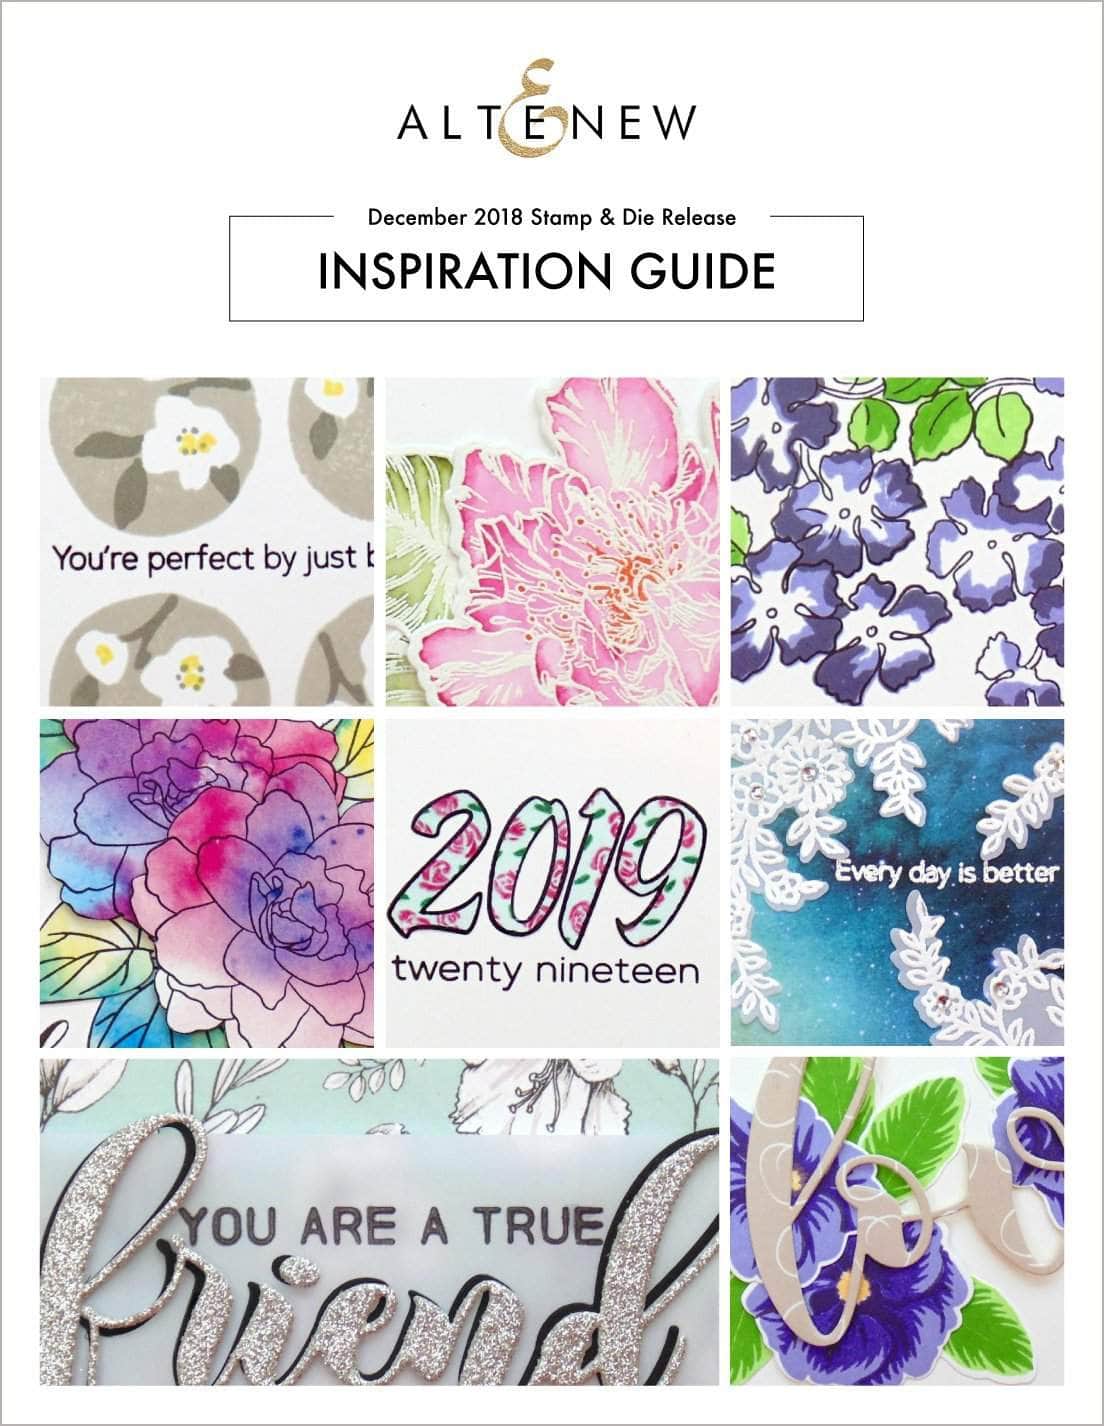 Printed Media The Beauty of Nature Stamp & Die Release Inspiration Guide